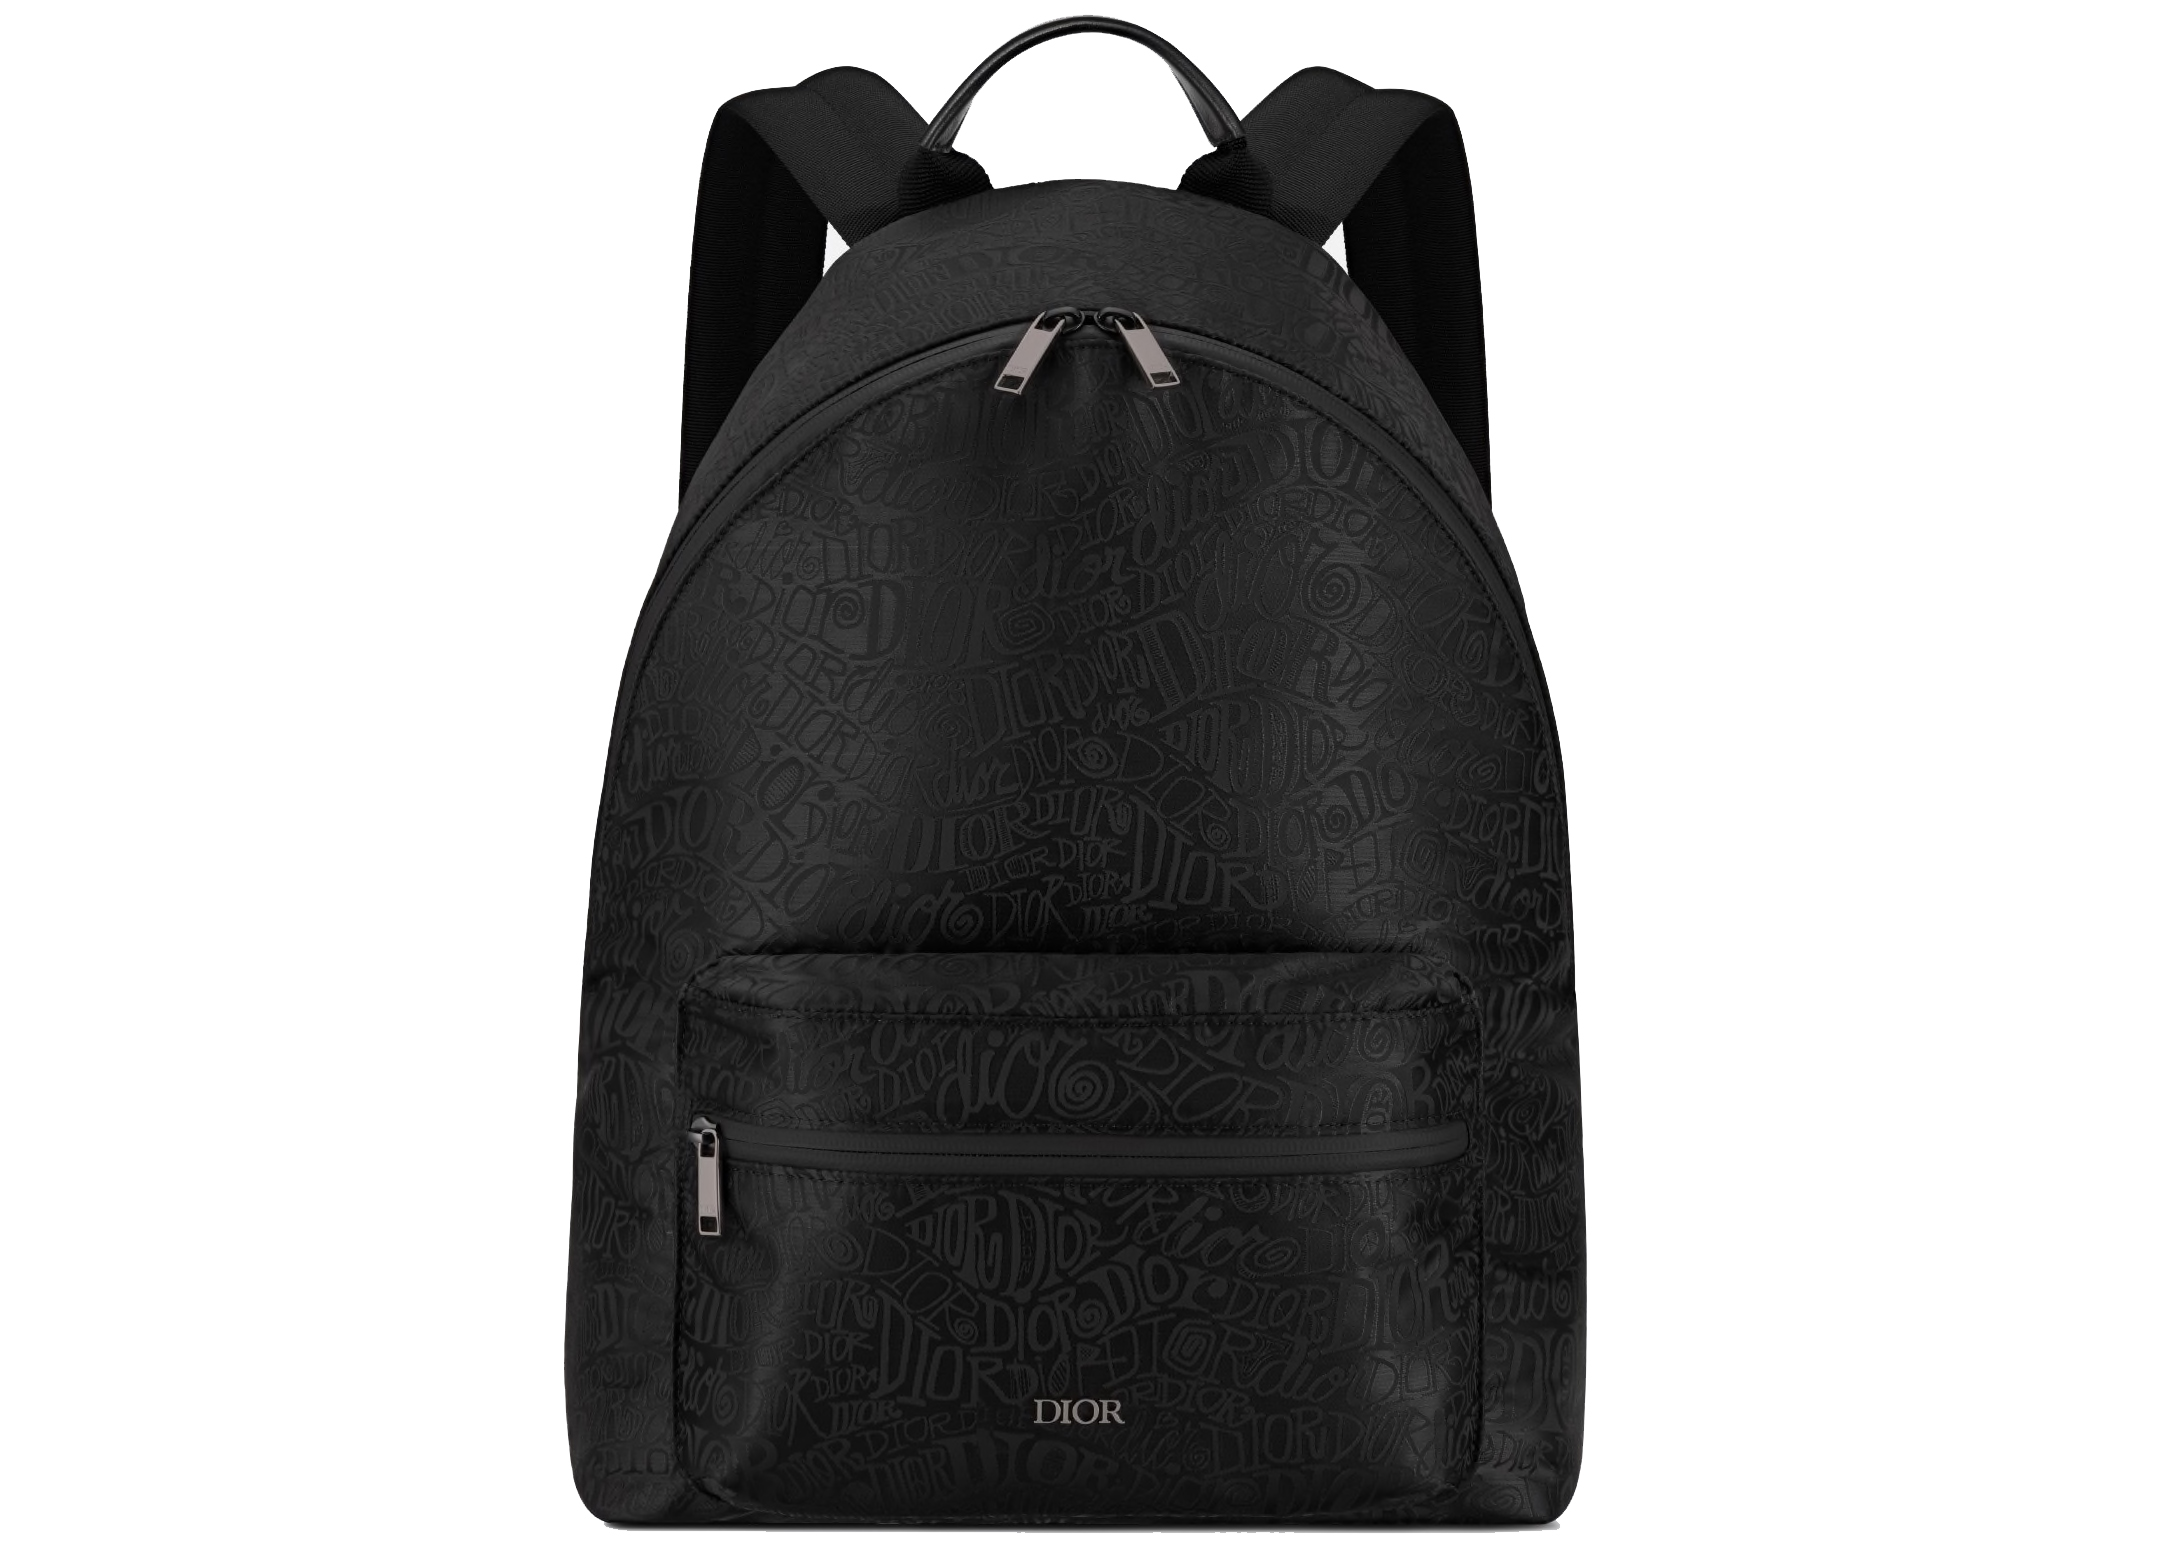 Dior And Shawn Rider Backpack Black